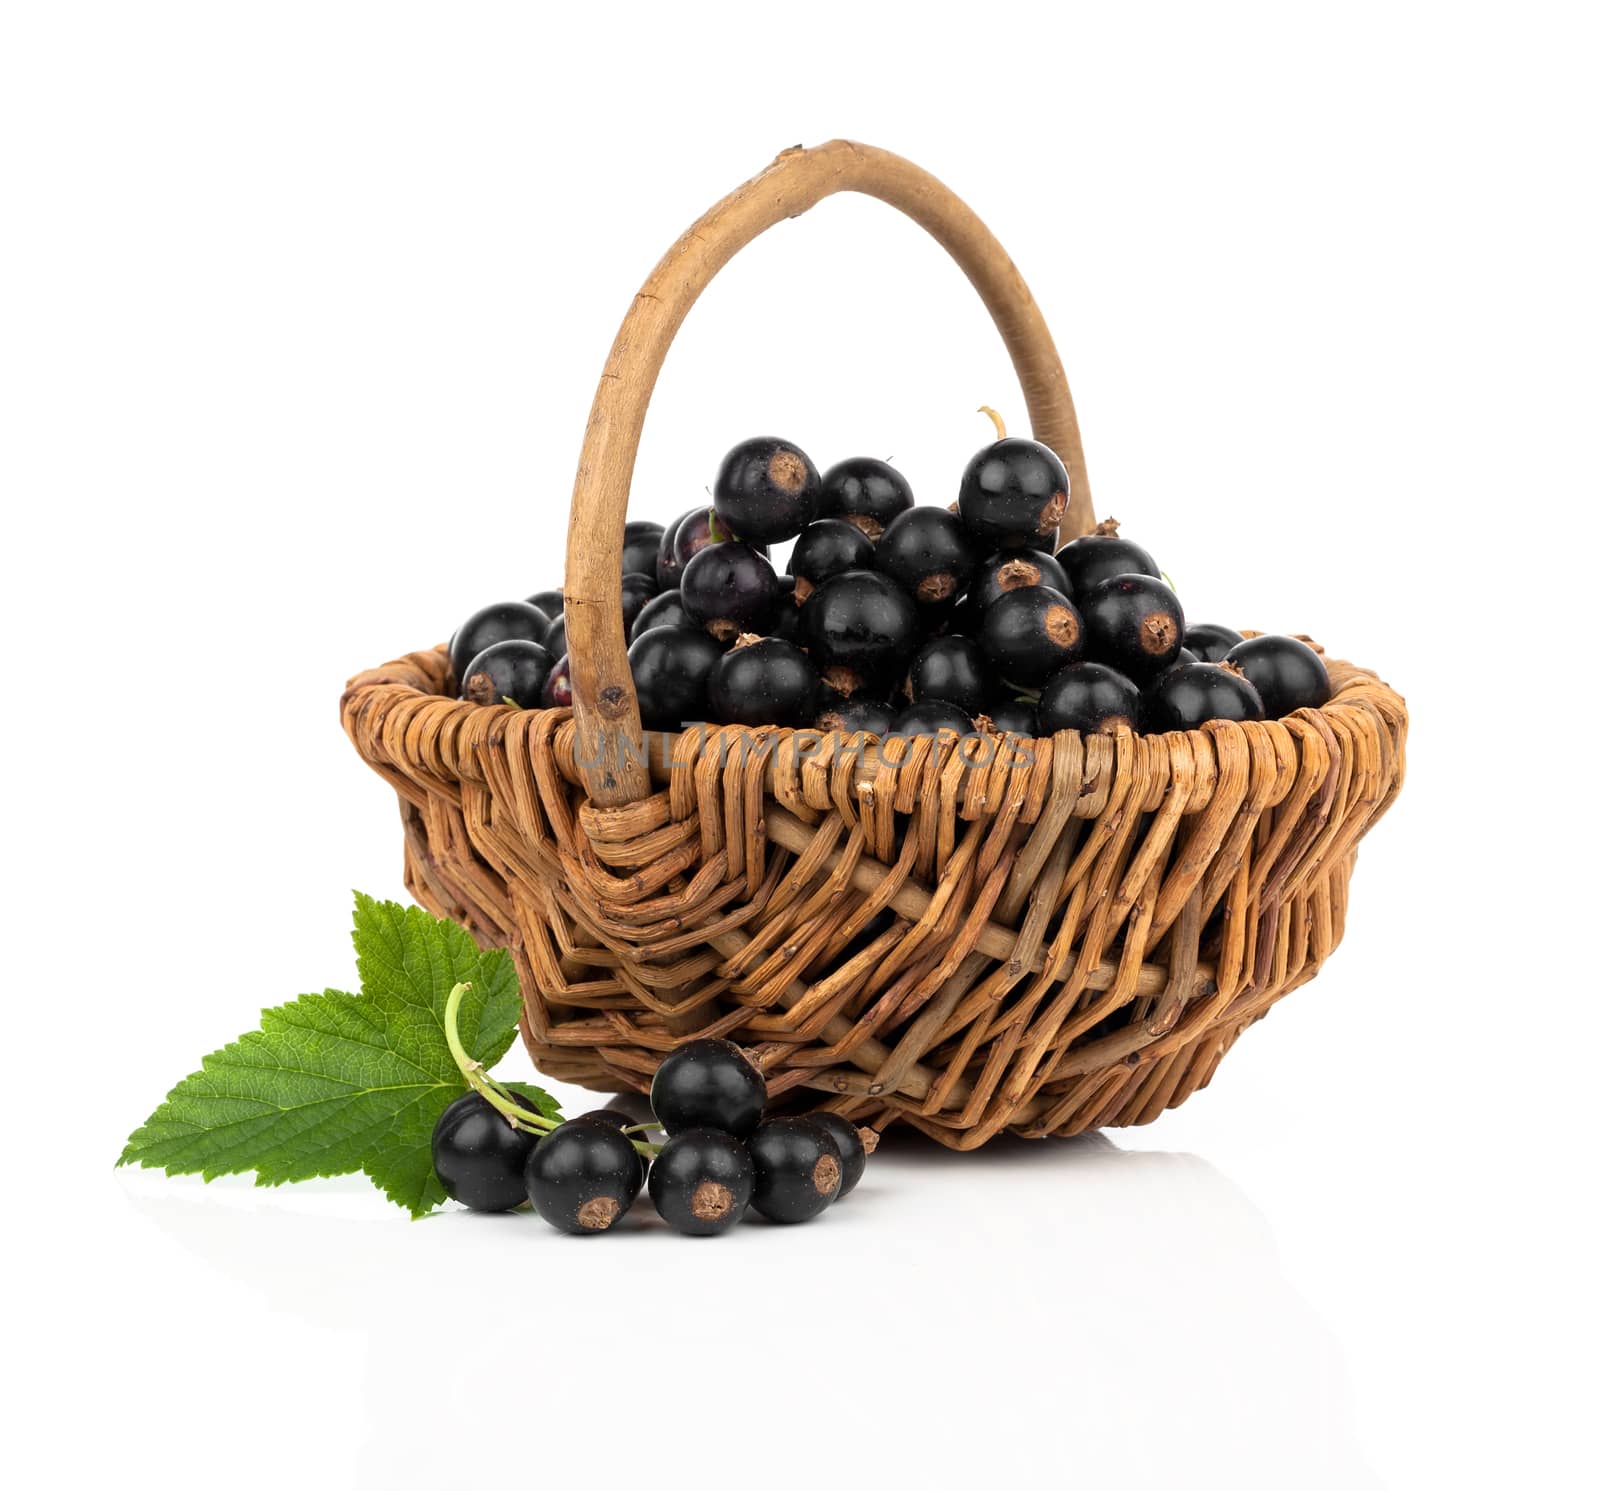 black currant in a wicker basket, on a white background by motorolka